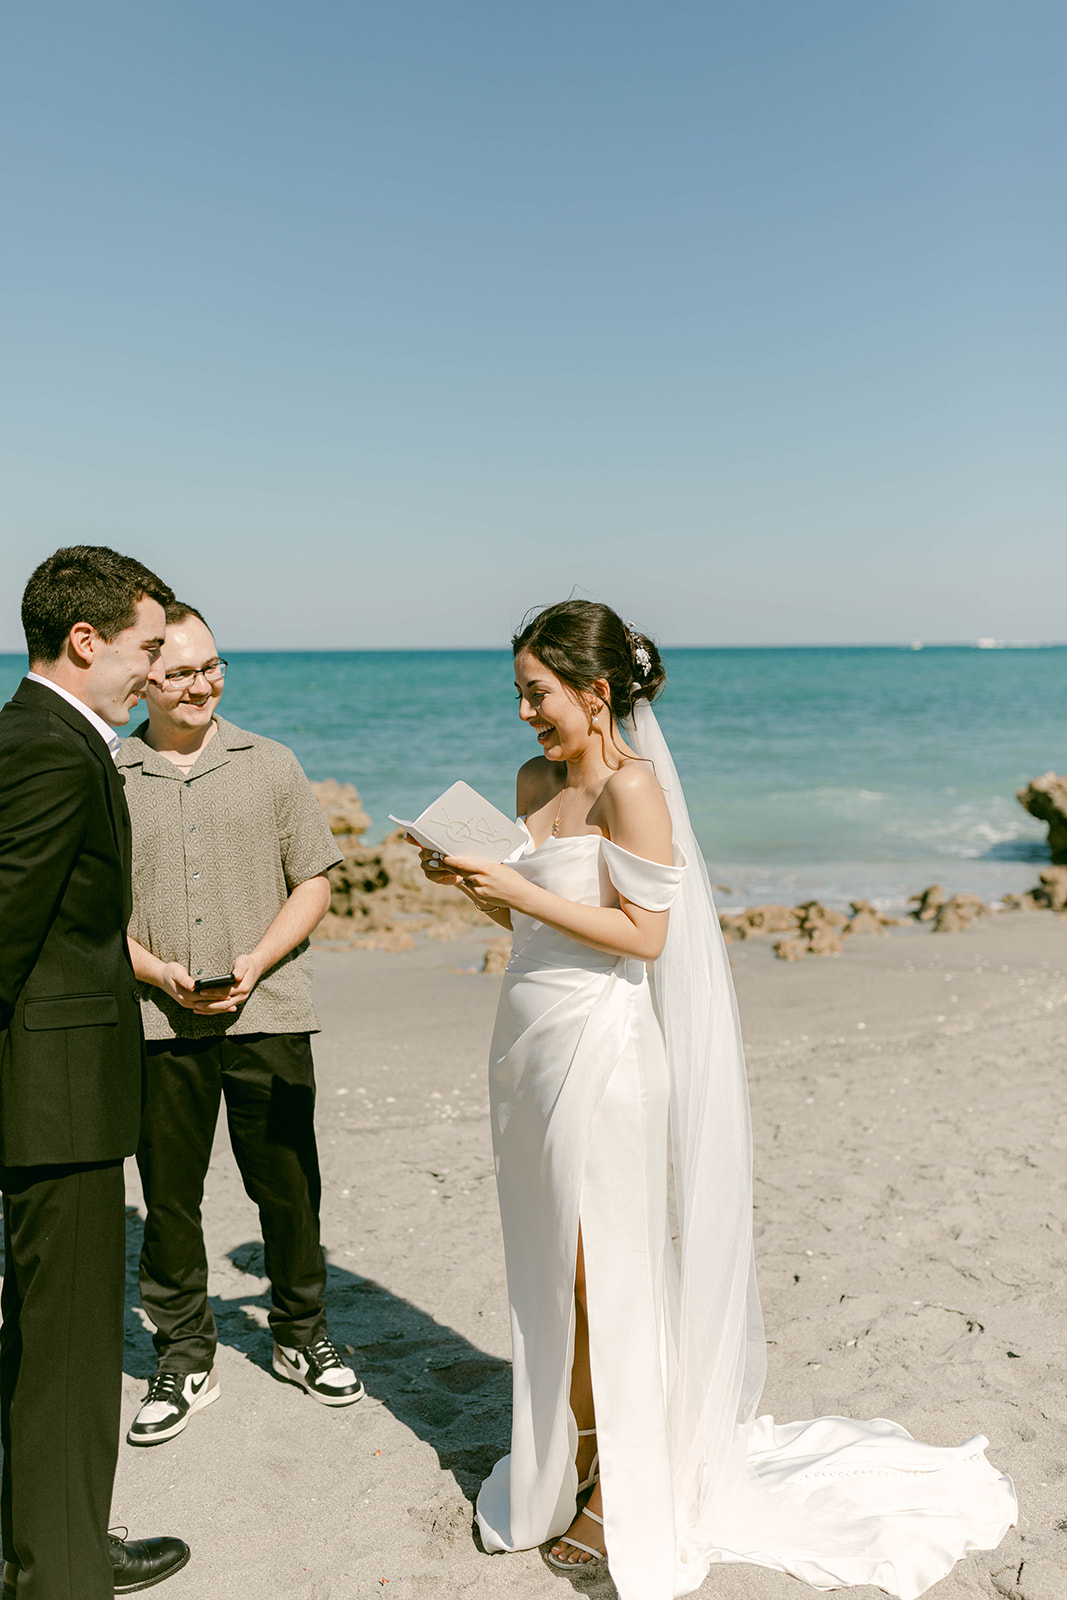 Bride reads vows to groom at intimate wedding ceremony in Palm Beach, Florida